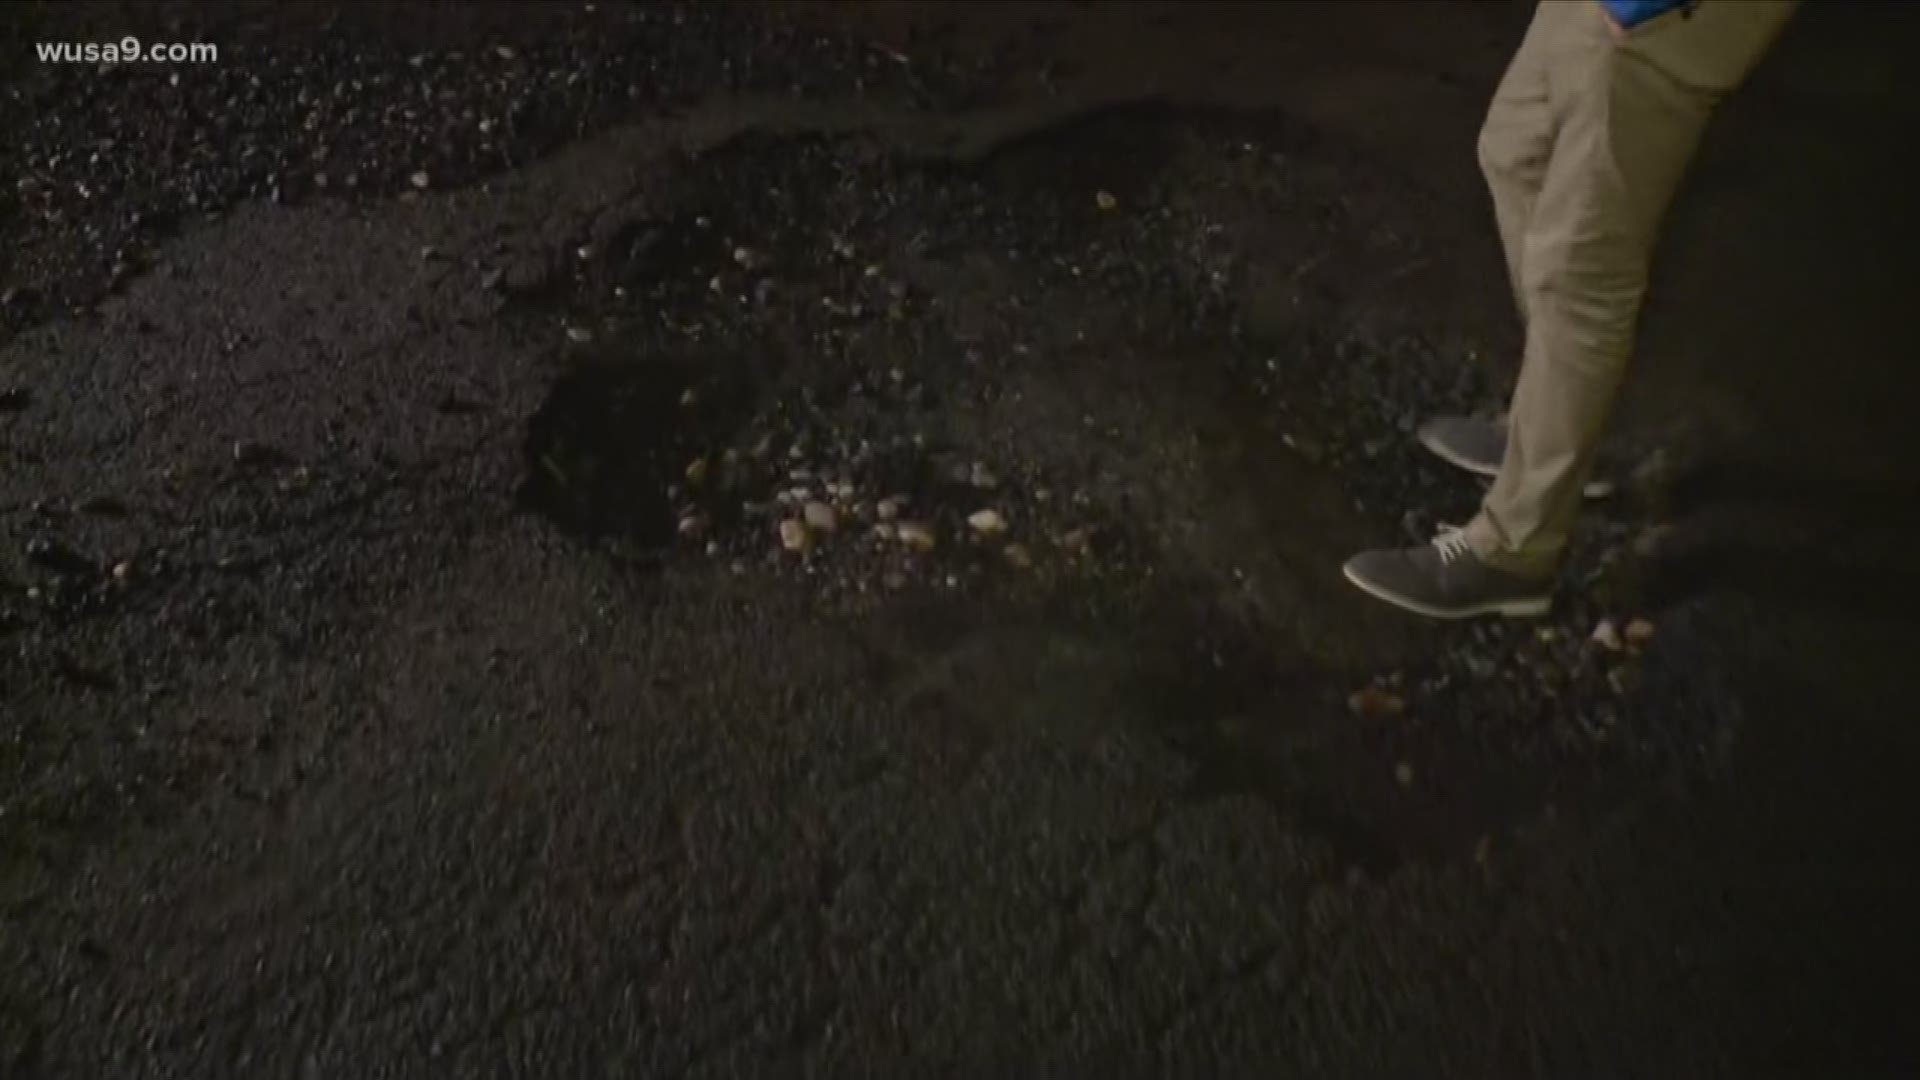 The pothole issue in the DC area is getting worse.